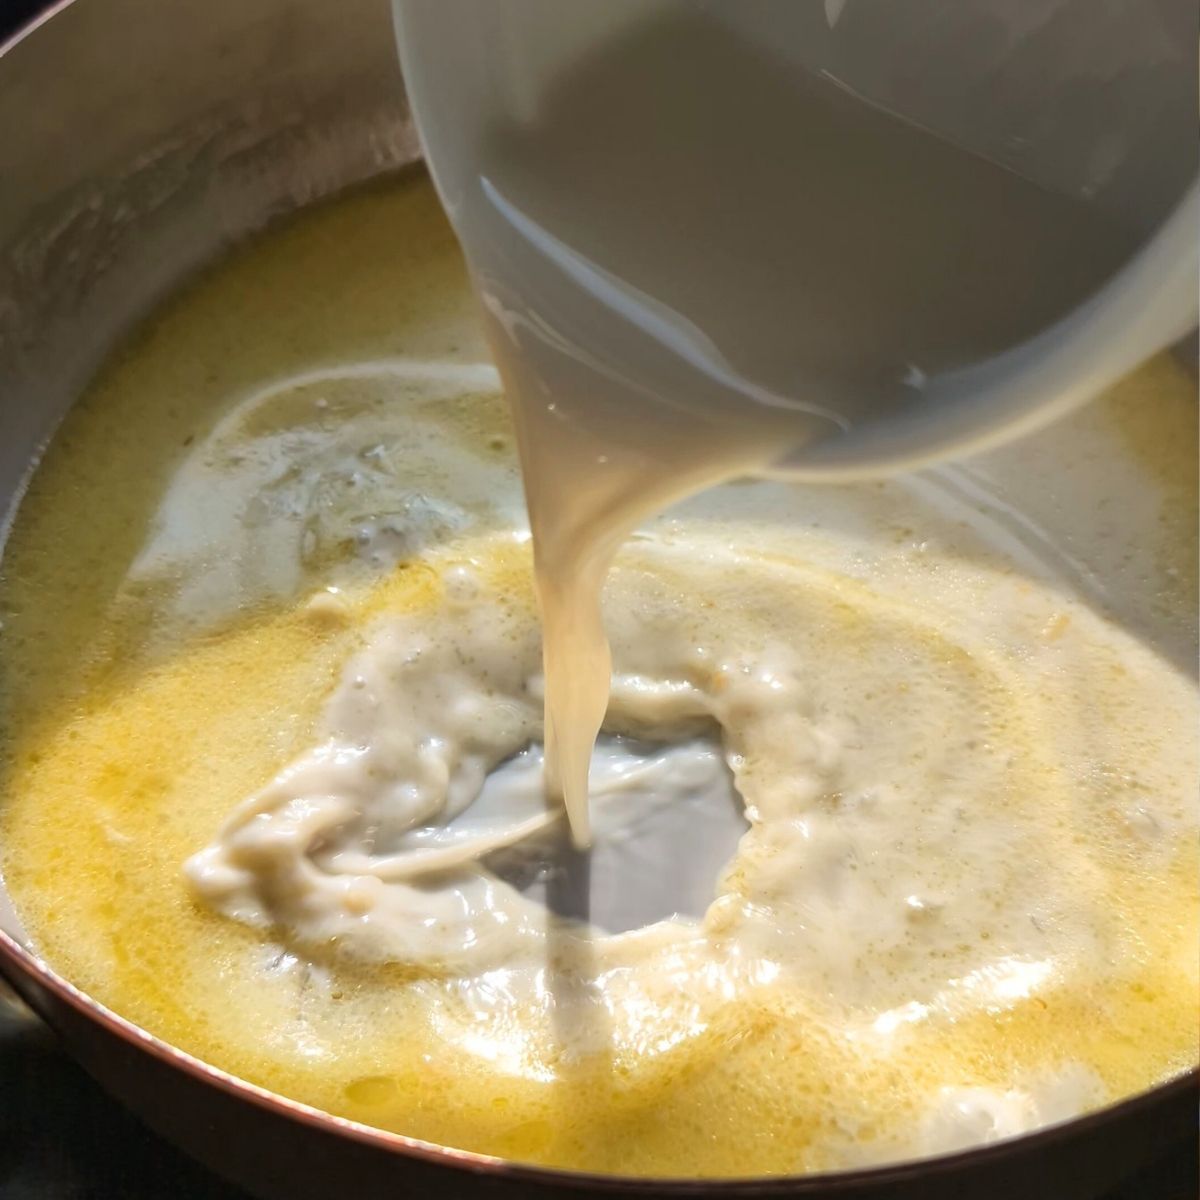 corn starch being poured into a pan of oat milk sauce with garlic and olive oil.